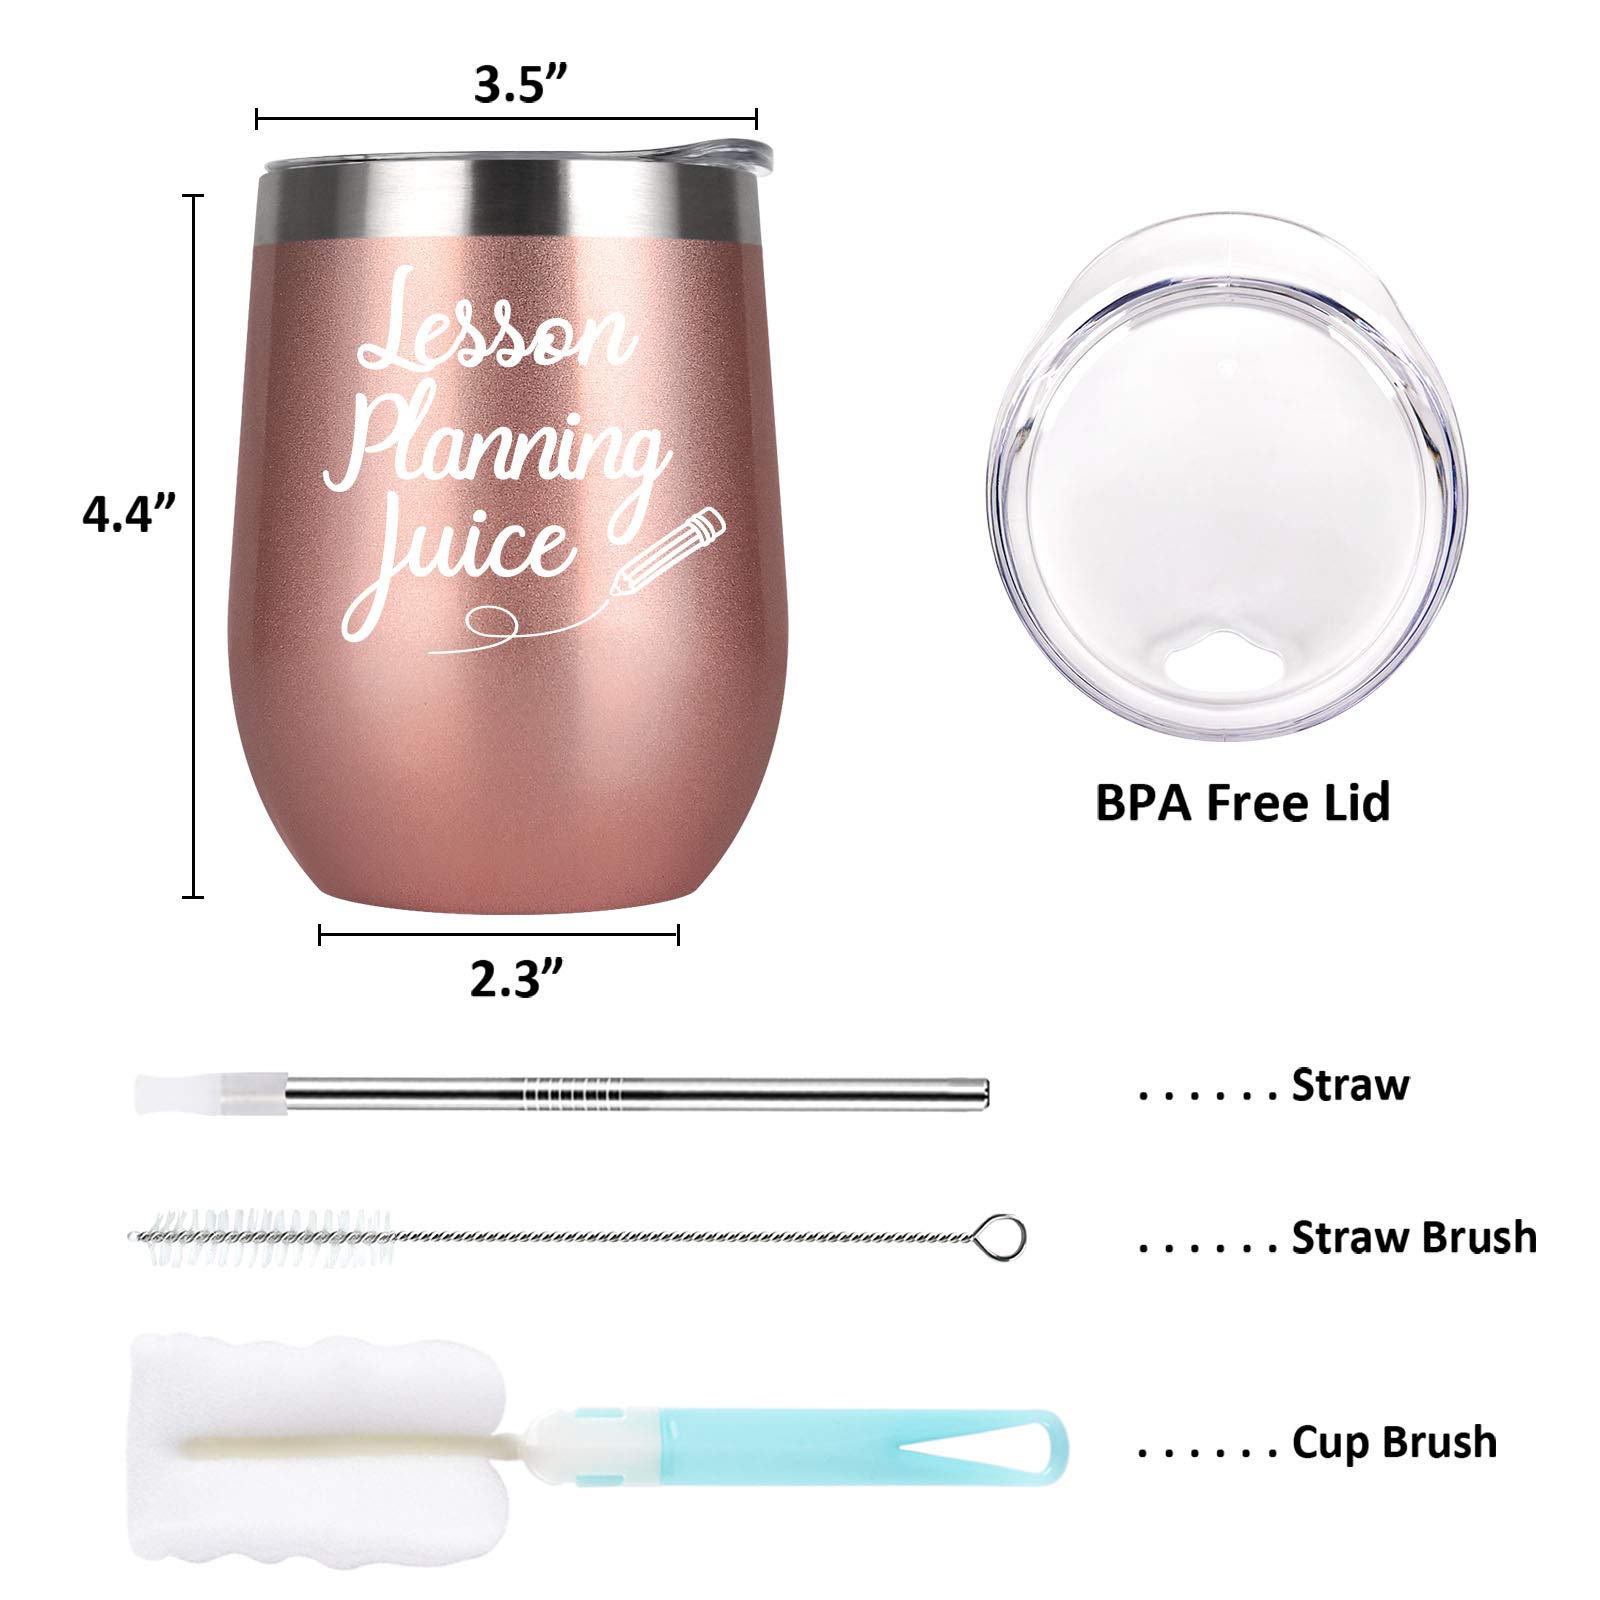 Cpskup Teacher Appreciation Gifts for Women, Lesson Planning Juice Stainless Steel Wine Tumbler with Lid, Funny Birthday Christmas Teachers Day Gifts Thank You Gifts for Teacher(12oz, Rose Gold)